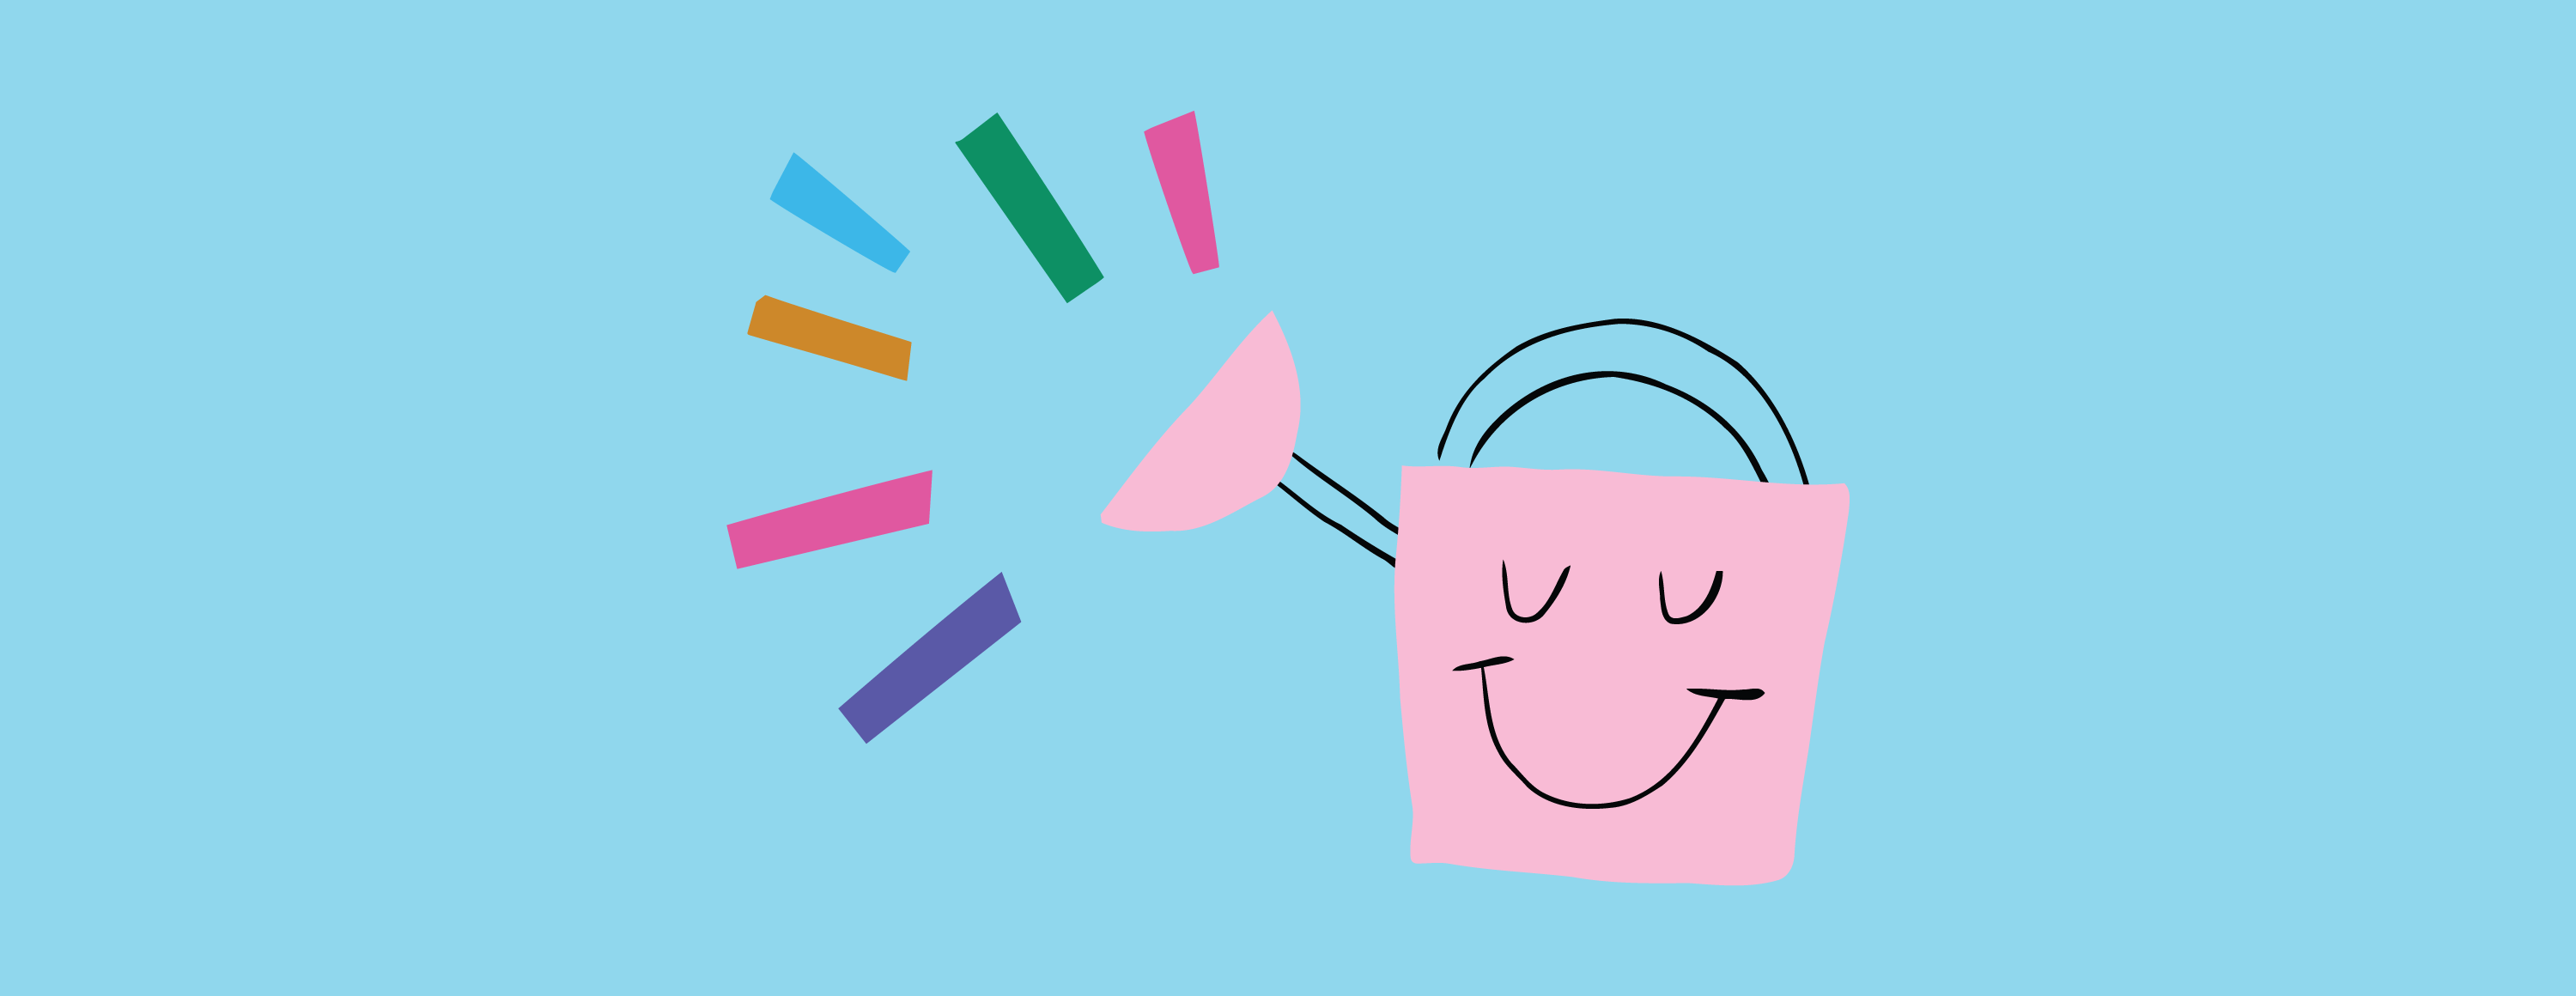 An illustration of a smiling pink watering can with different coloured lines respresenting water coming out of the spout on a light blue background